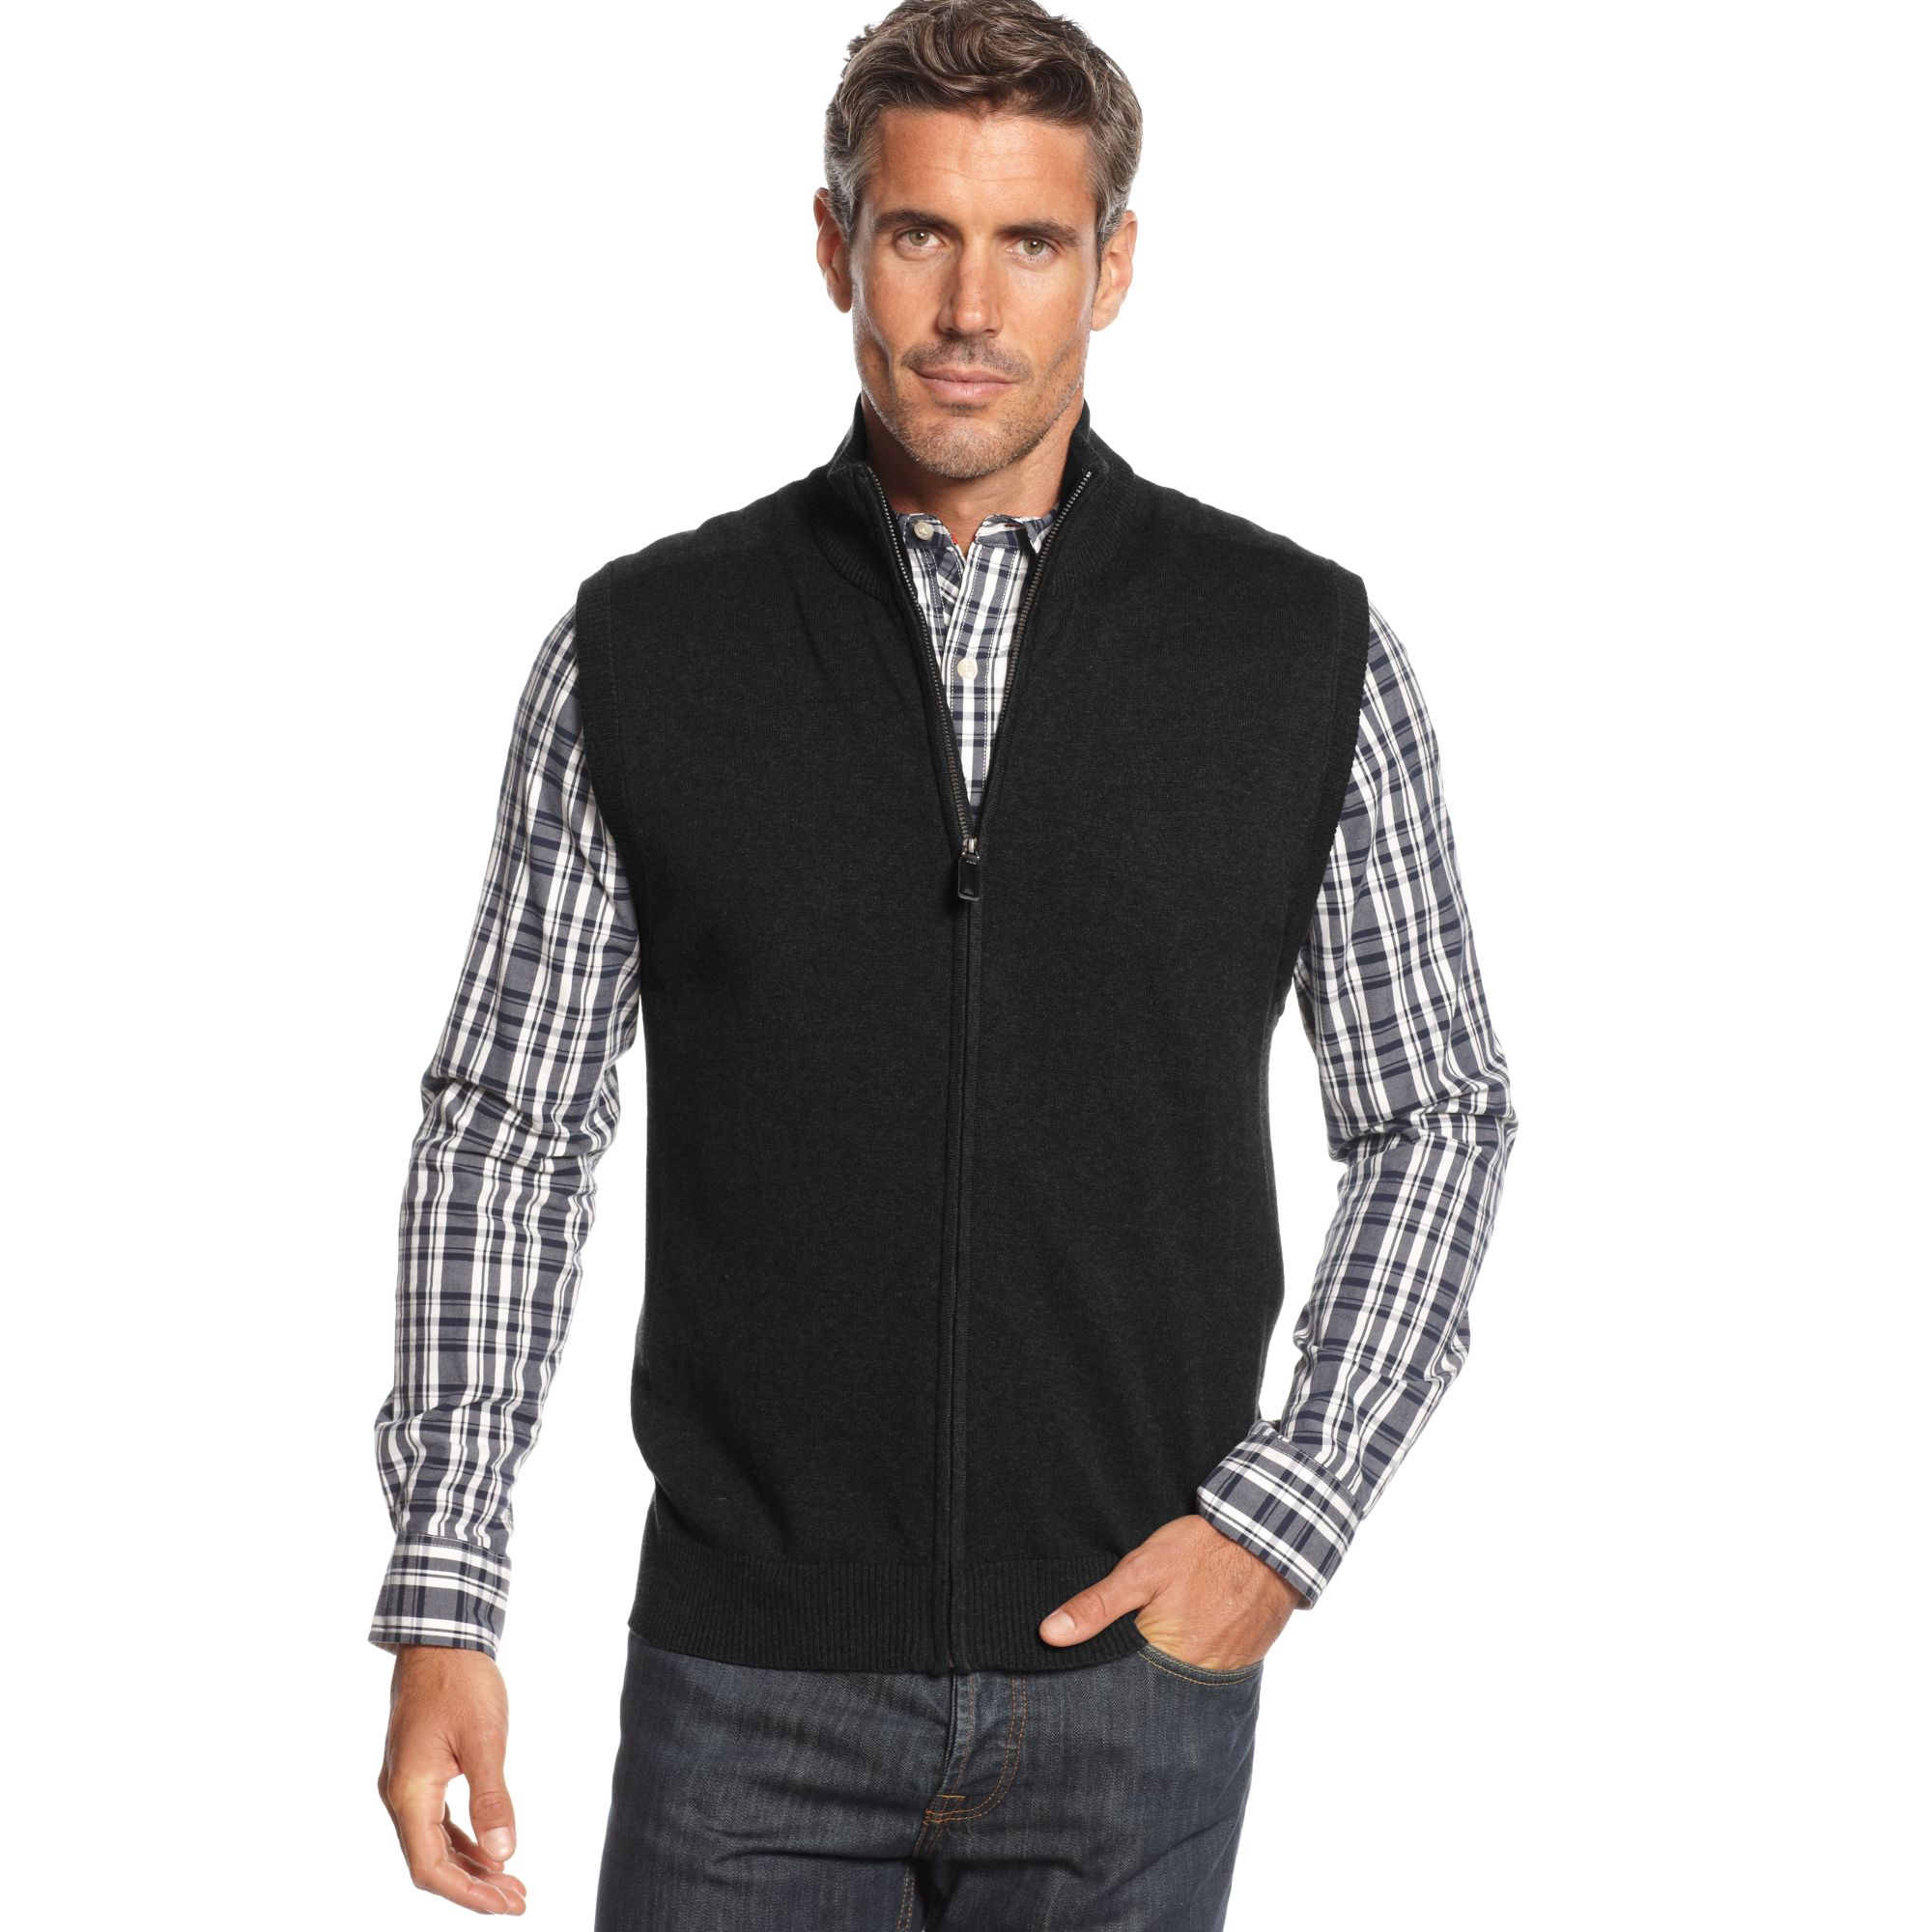 Black Sweater Vest Men - Cardigan With Buttons